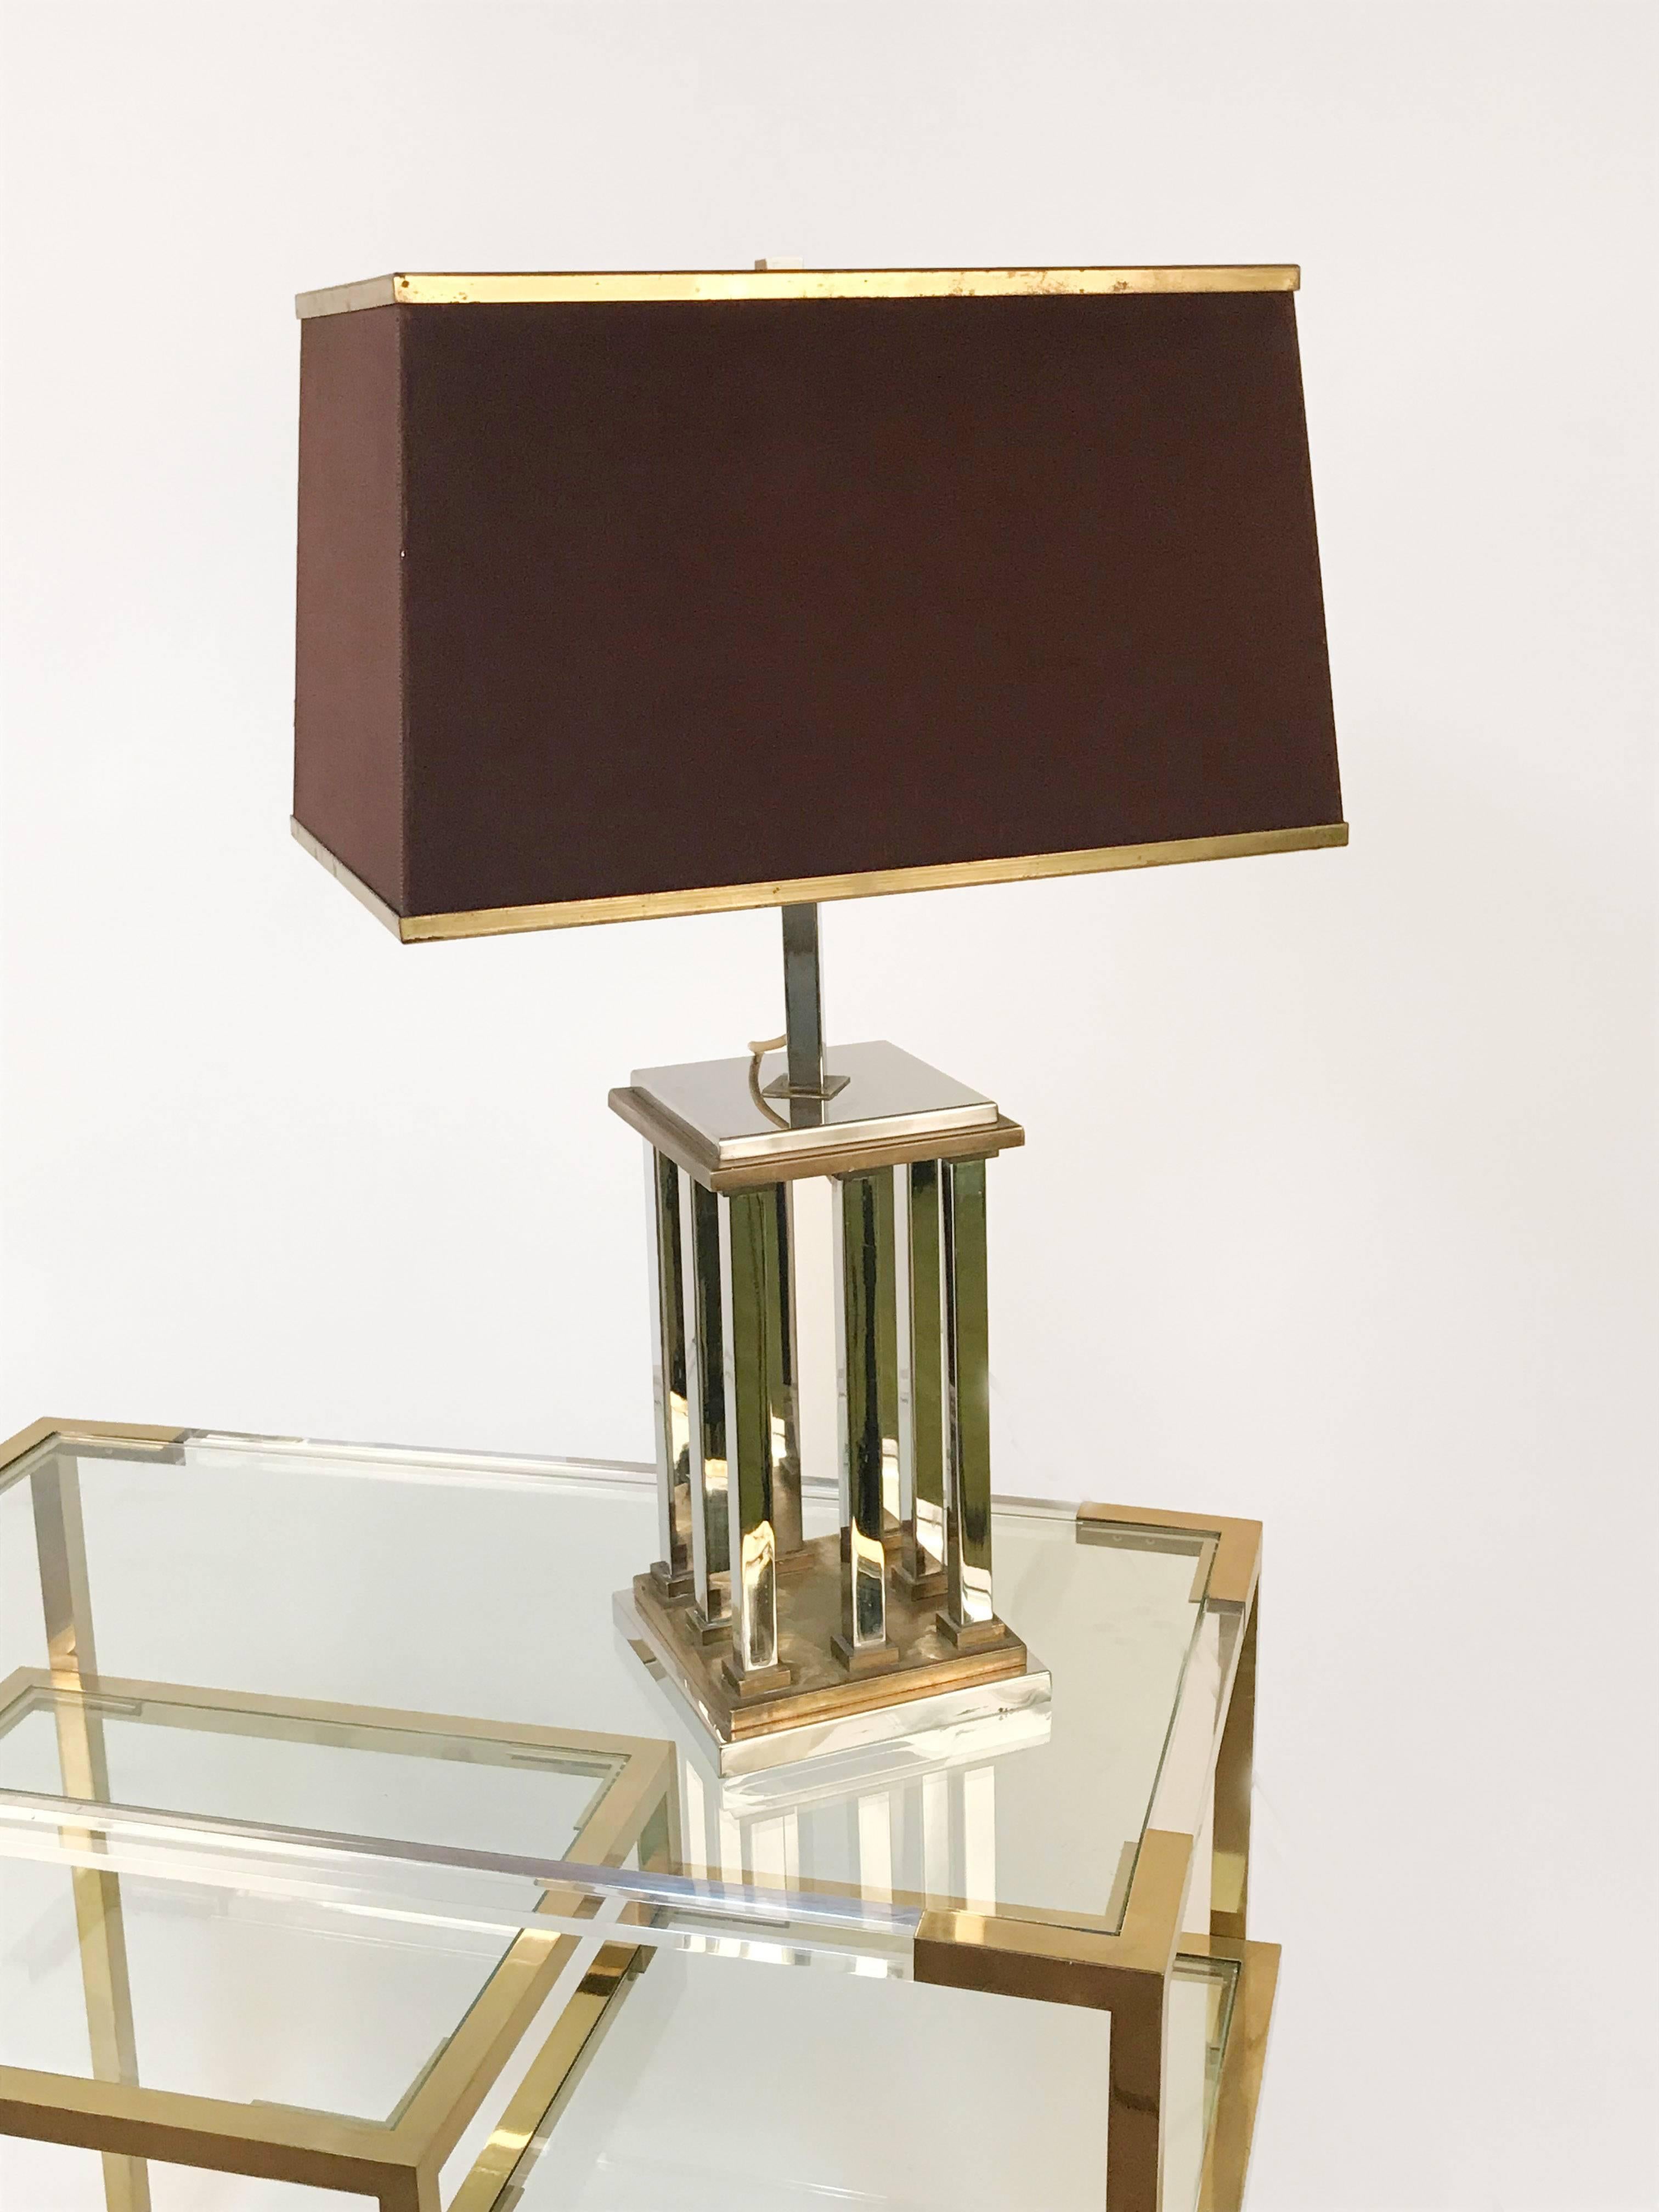 Beautiful Italian lamp from the 1970s, made of brass and chrome by Romeo Rega.